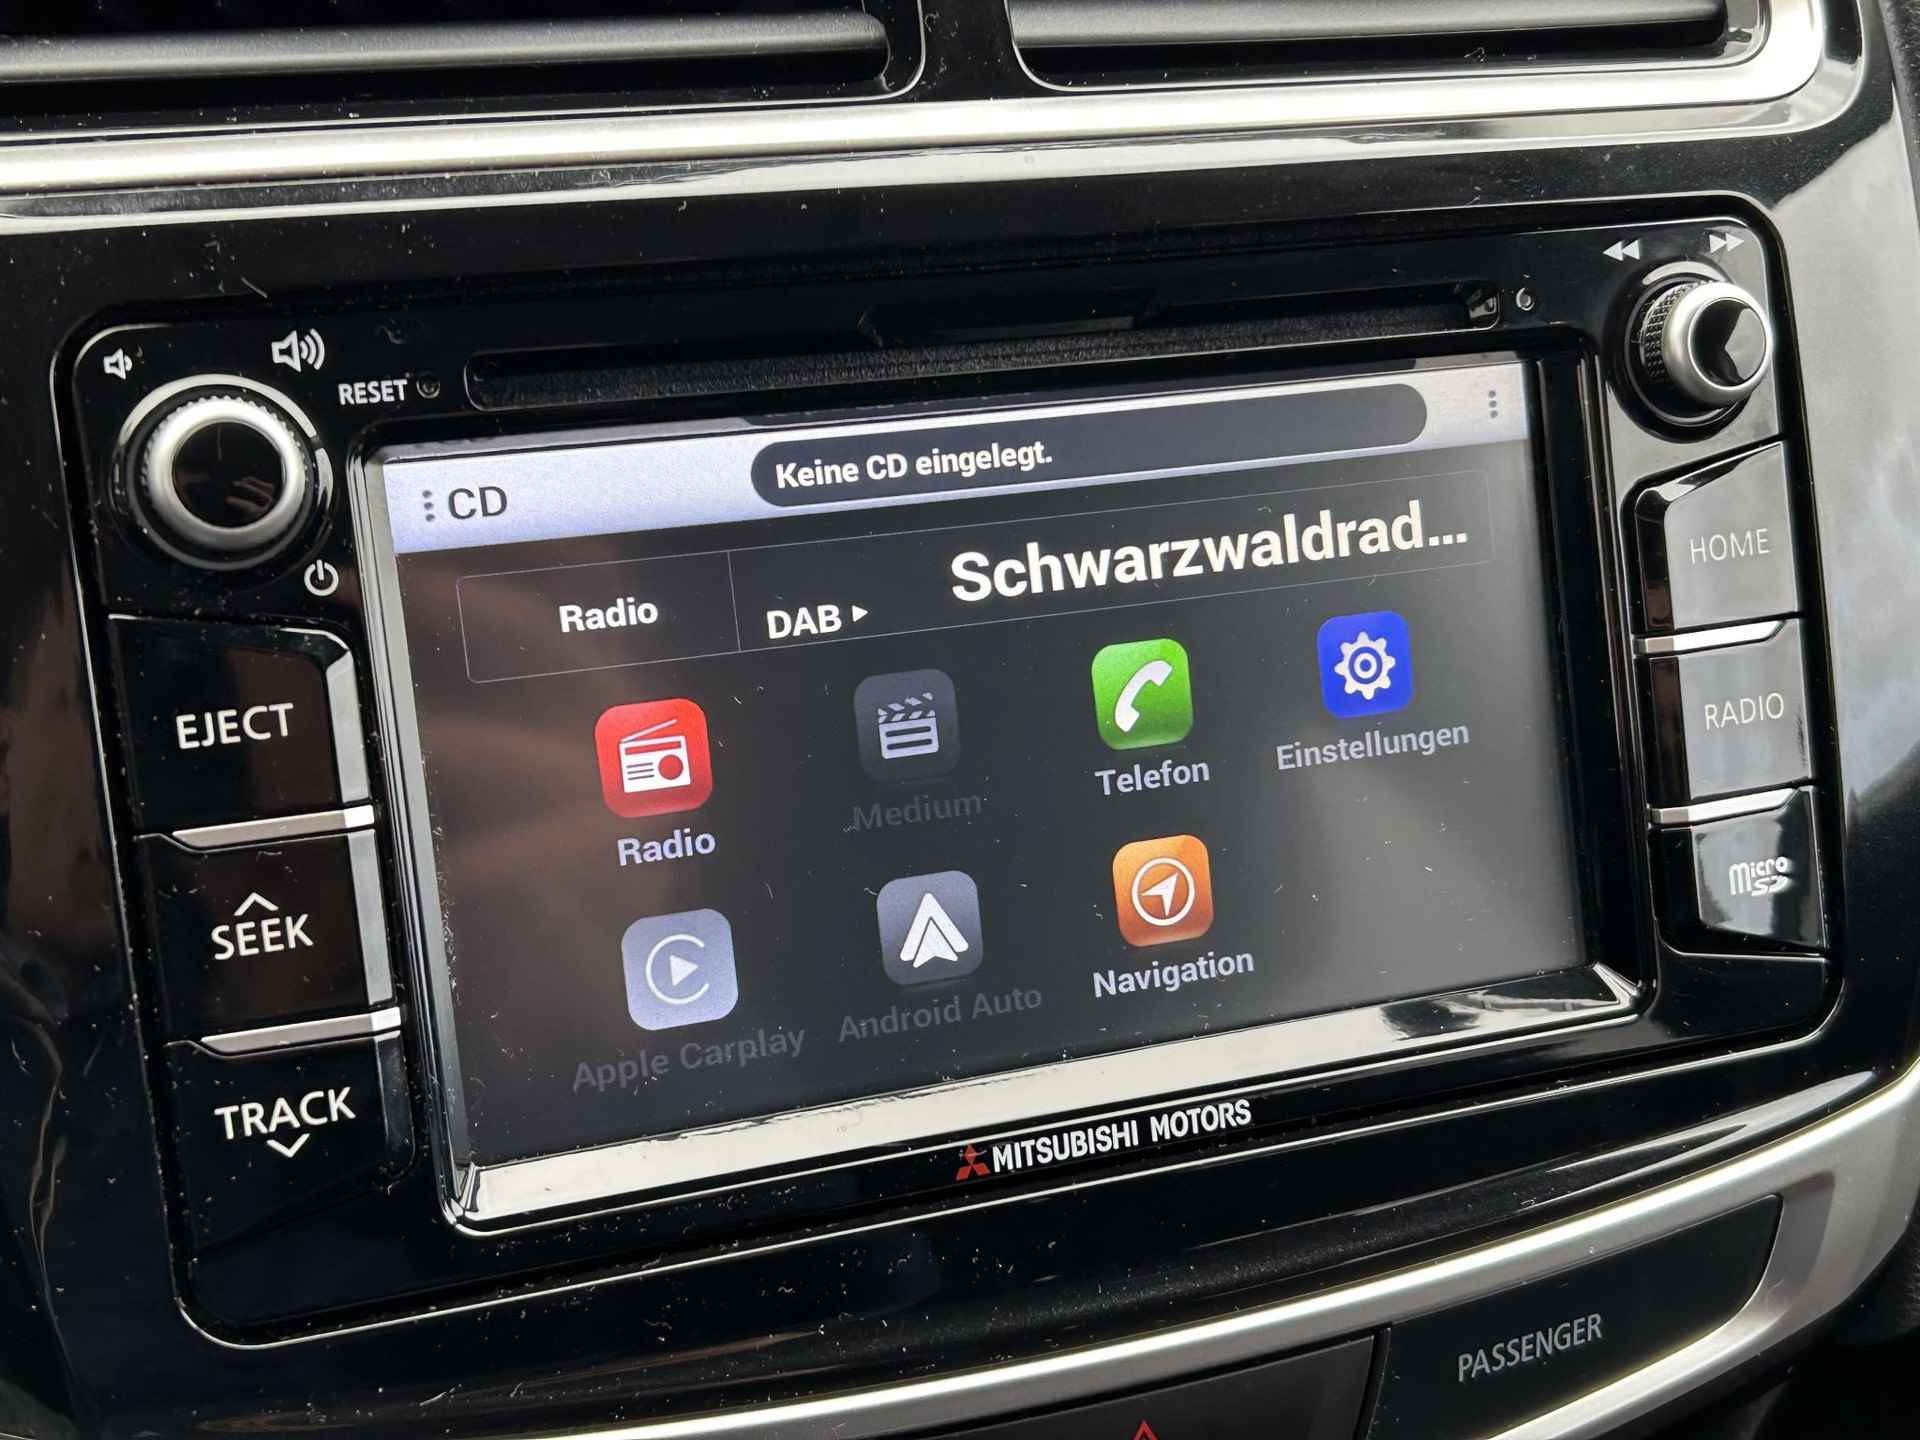 Mitsubishi ASX 1.6 Cleartec Connect Pro / Achteruitrijcamera / Trekhaak / Cruise control / Apple Carplay/Android Auto / INCLUSIEF WINTERSET - 19/36